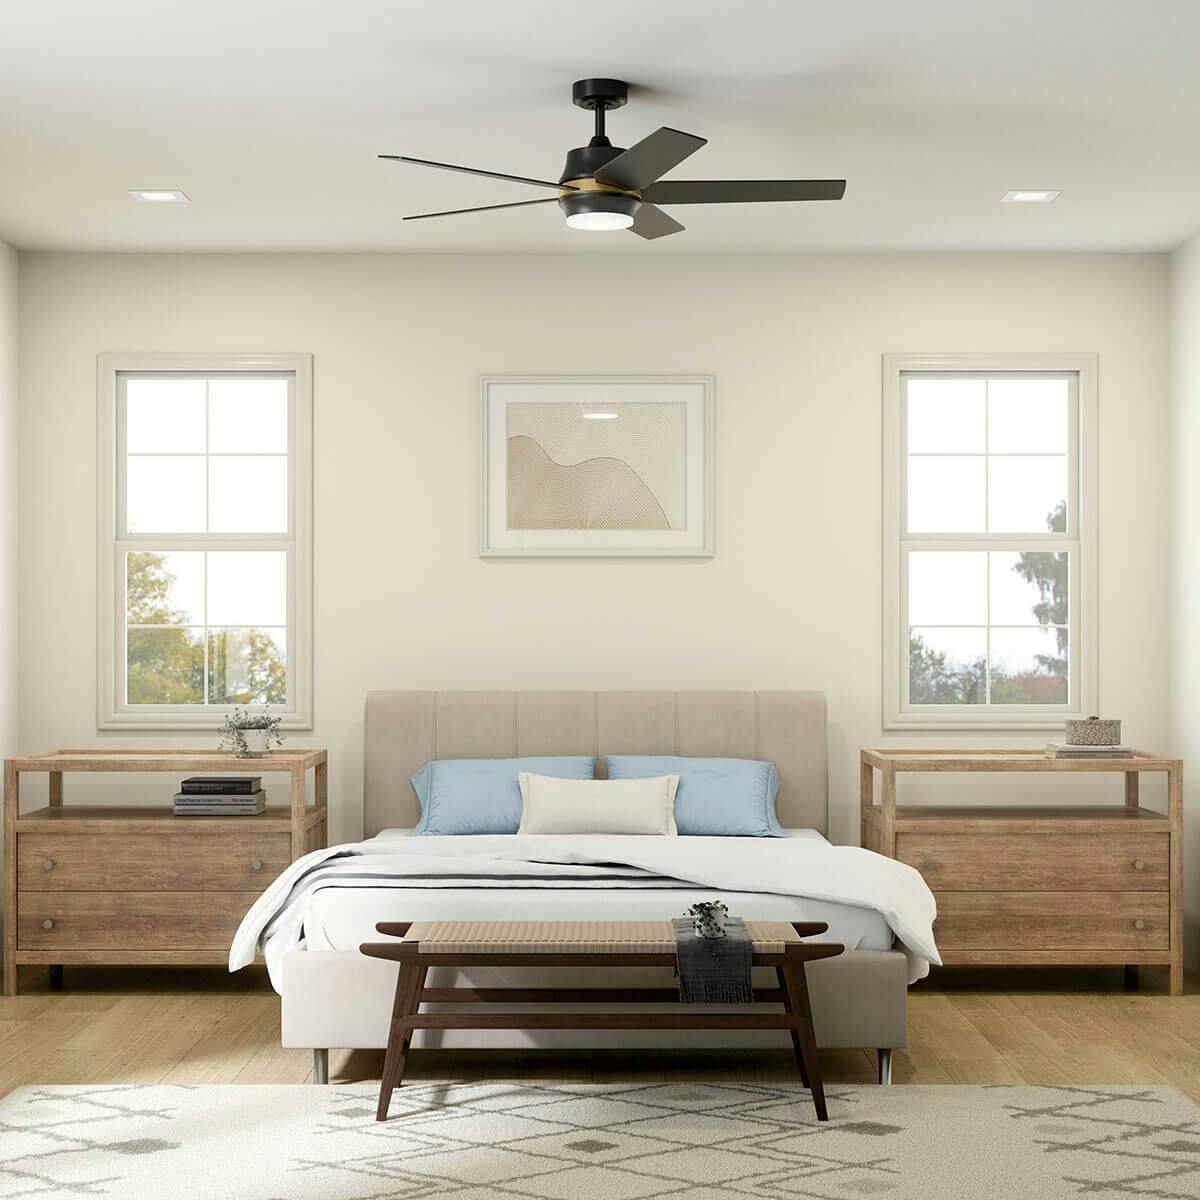 Day time bedroom image featuring Brahm ceiling fan 300059SBK